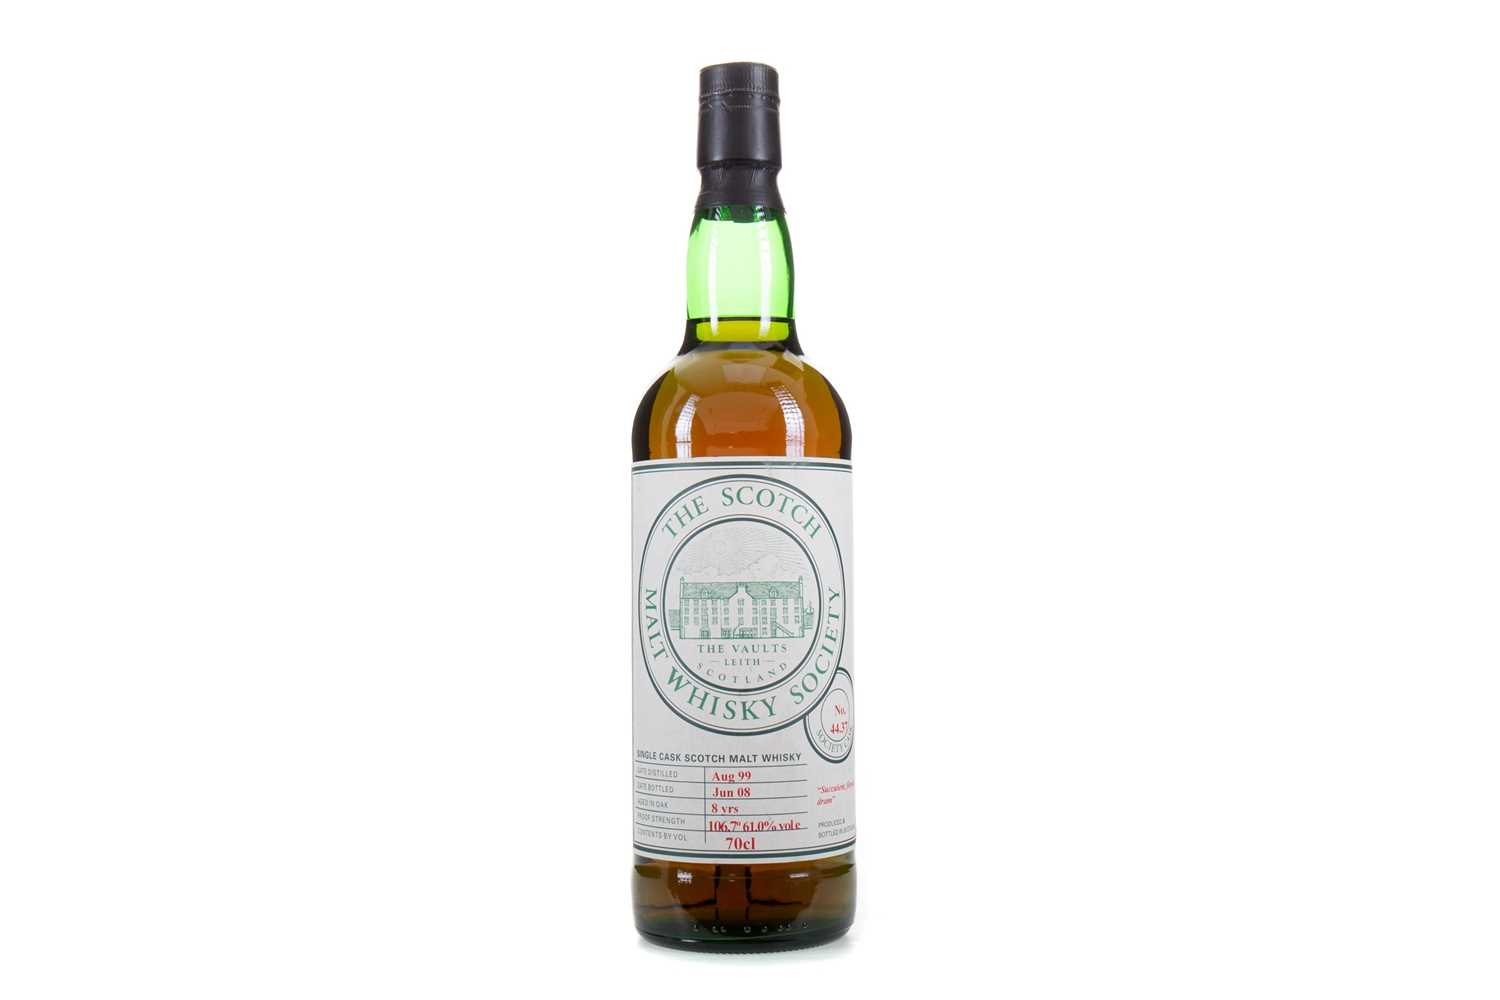 Lot 551 - SMWS 44.37 CRAIGELLACHIE 1999 8 YEAR OLD